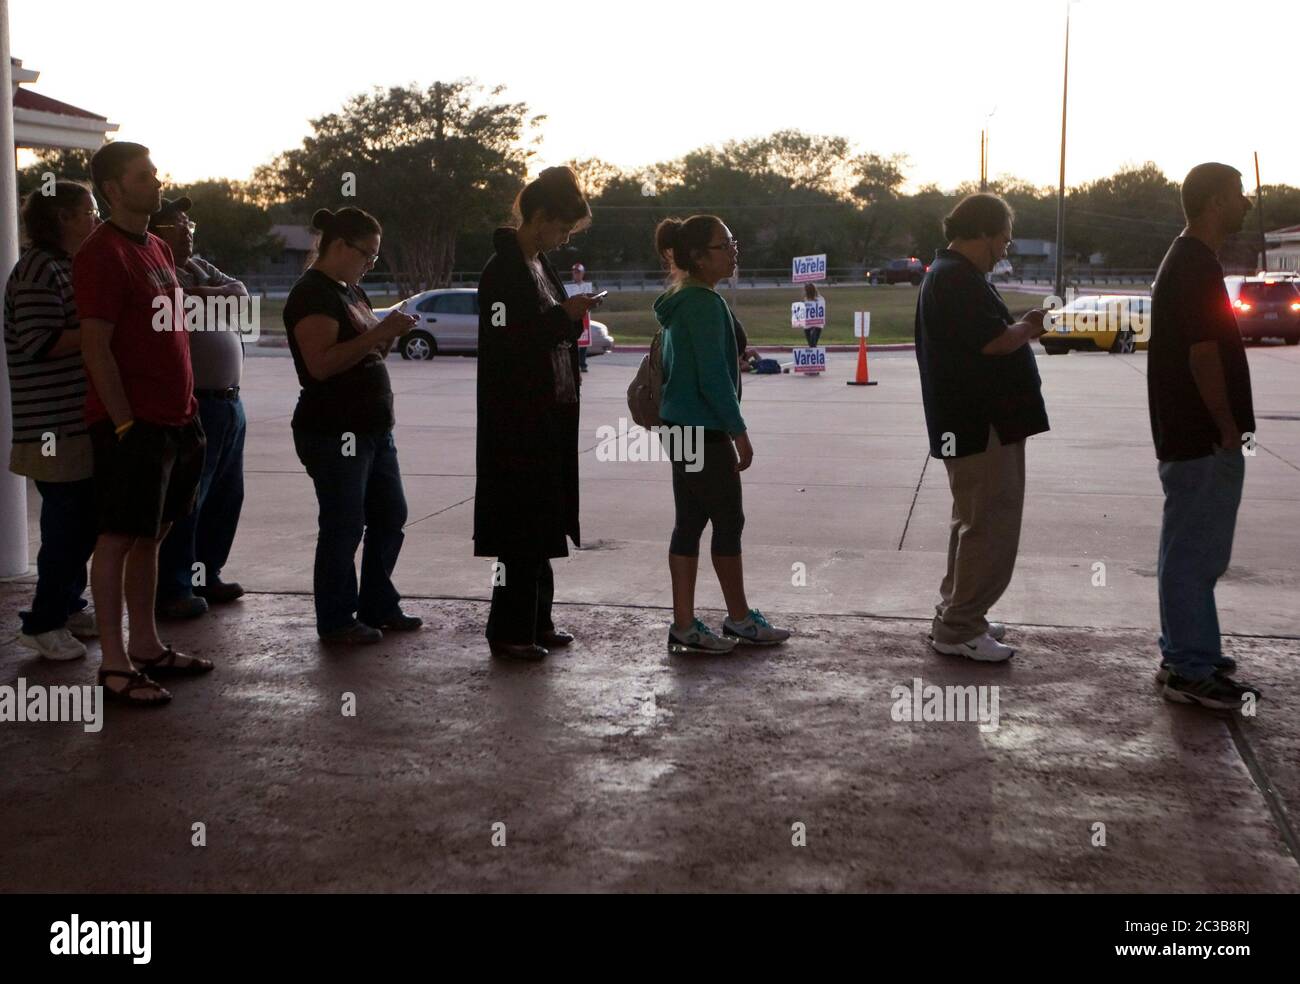 November 6th, 2012 Austin, Texas: Voters stand in line and review ballot waiting to cast their vote in Travis County Texas.   ©MKC / Daemmrich Photos Stock Photo